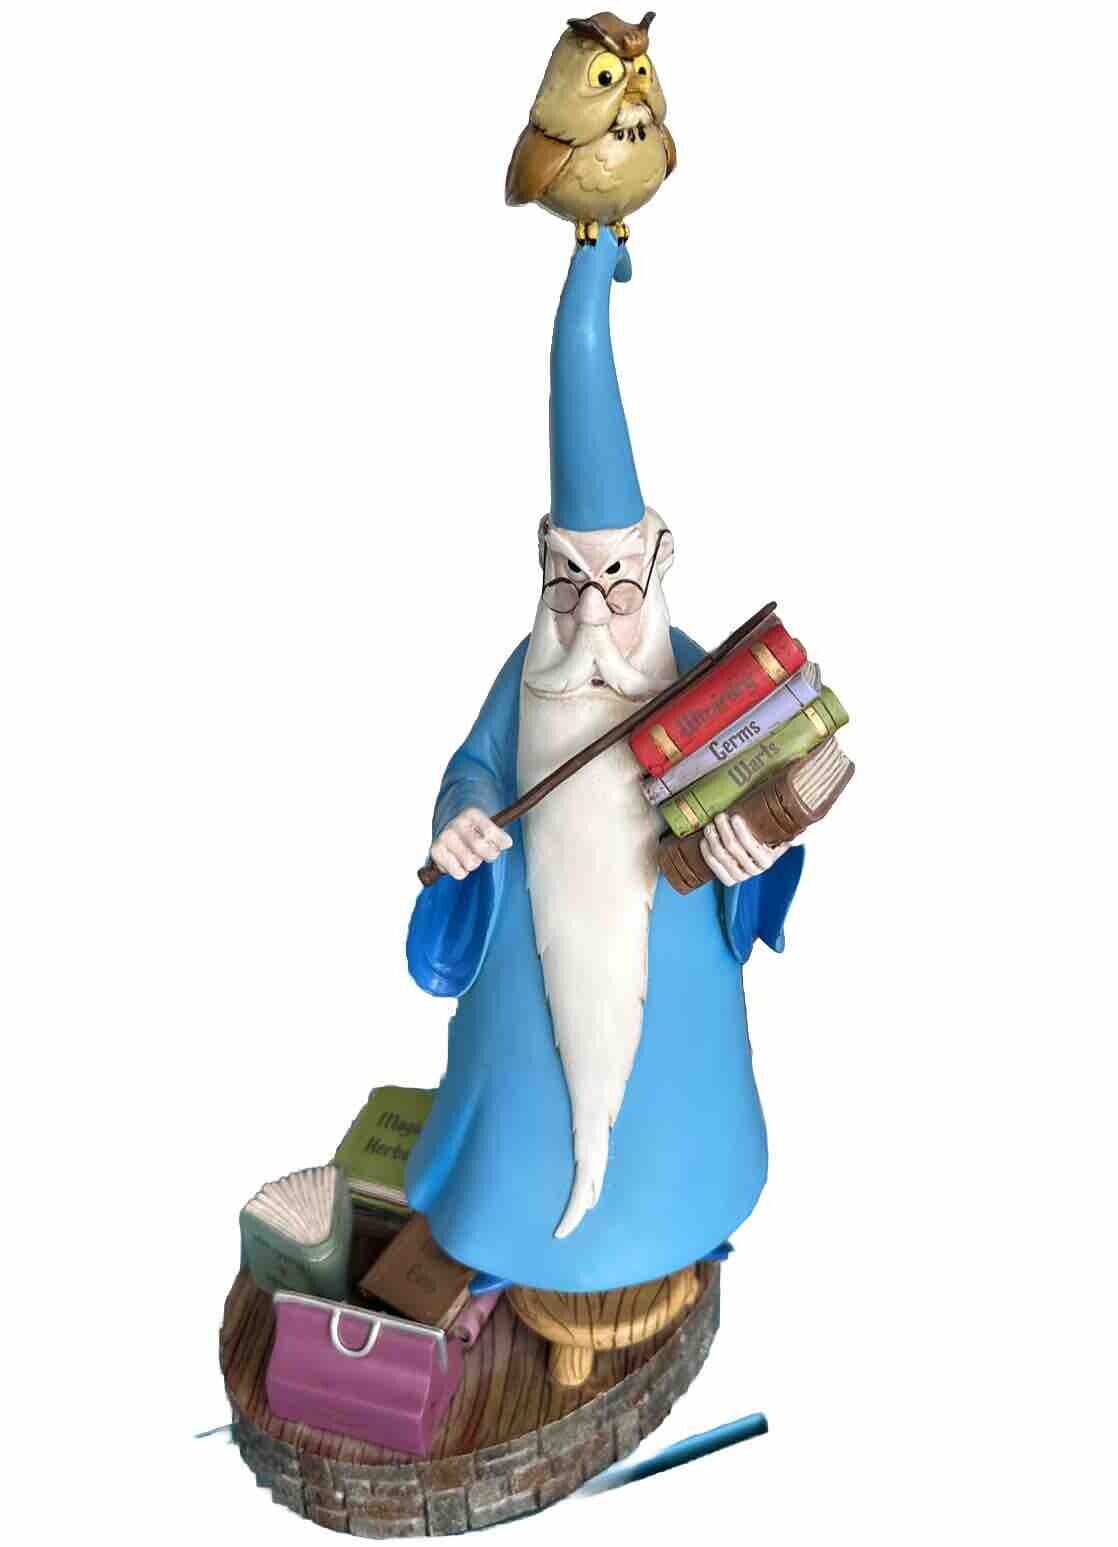 HTF Disney Med Big Fig Figure Statue - Merlin and Archimedes Sword In Stone 16”